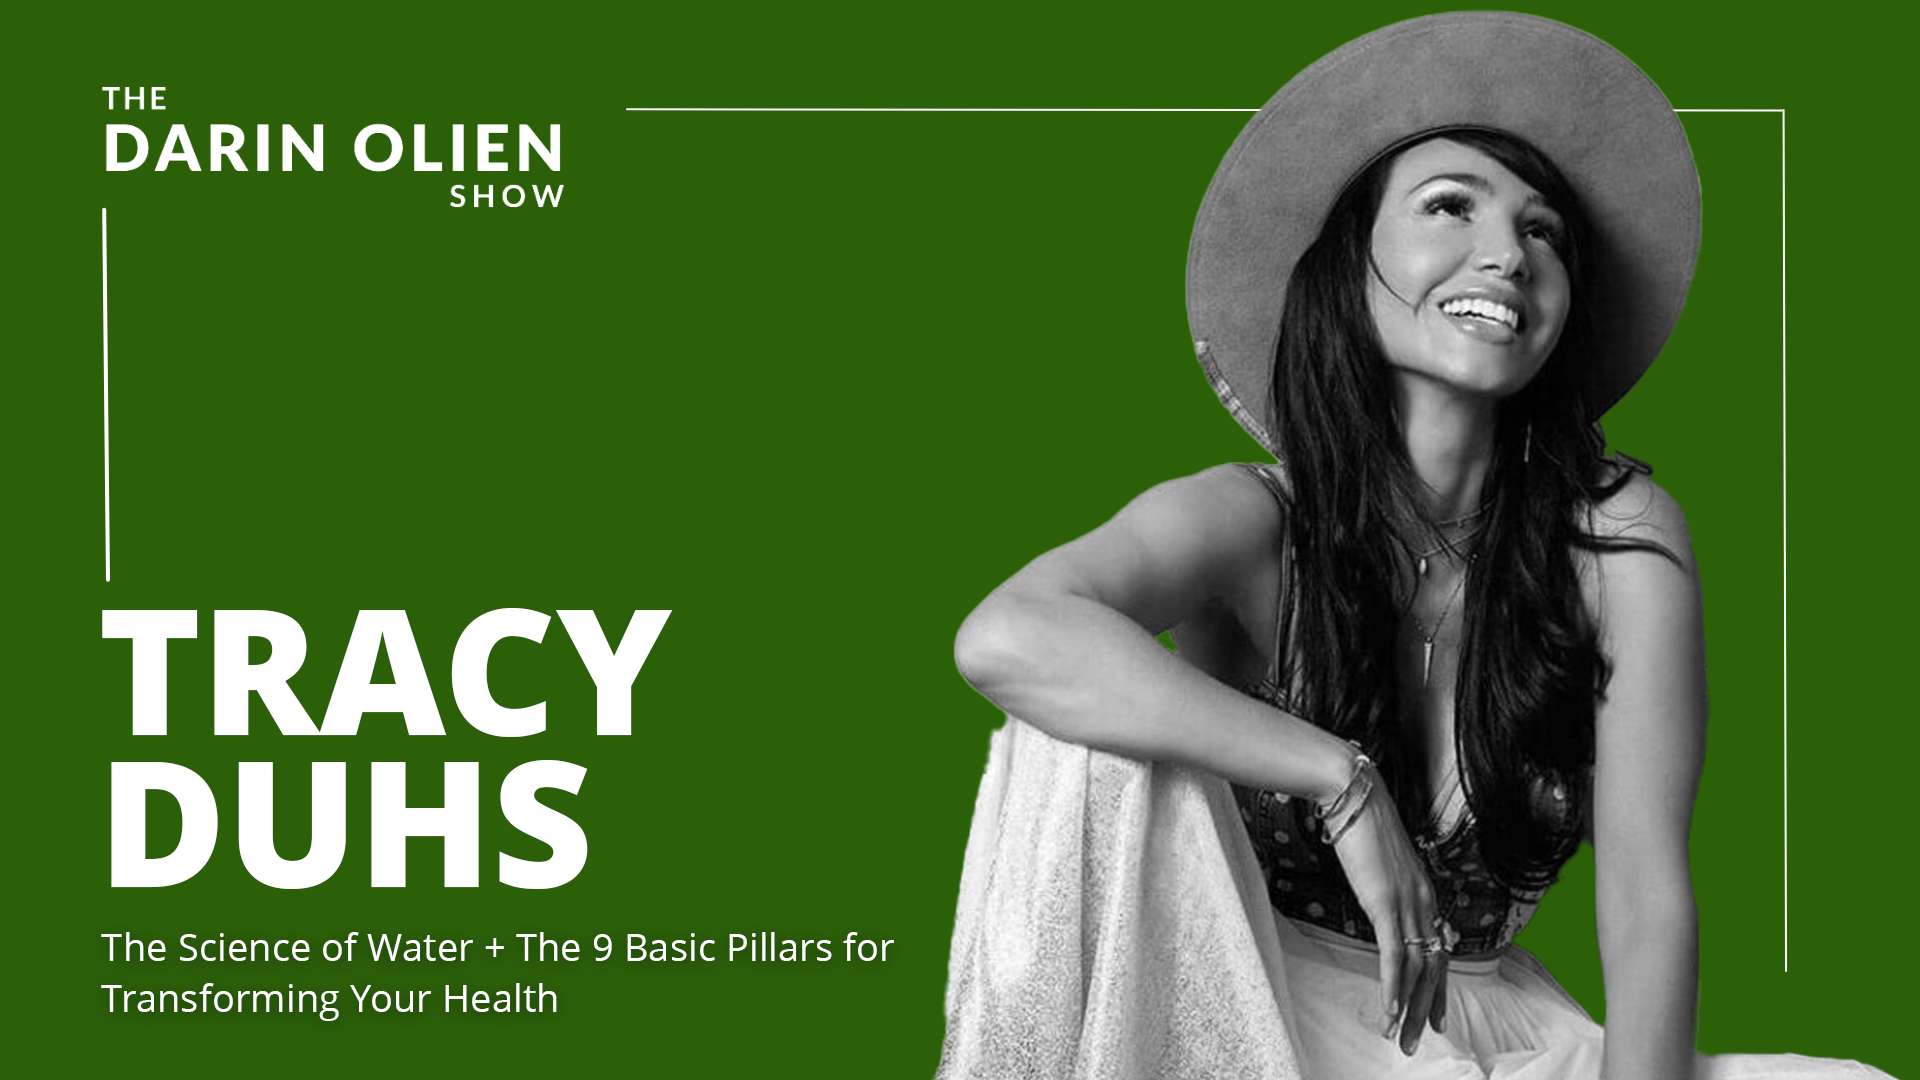 The Science of Water + The 9 Basic Pillars for Transforming Your Health  with Tracy Duhs - Darin Olien